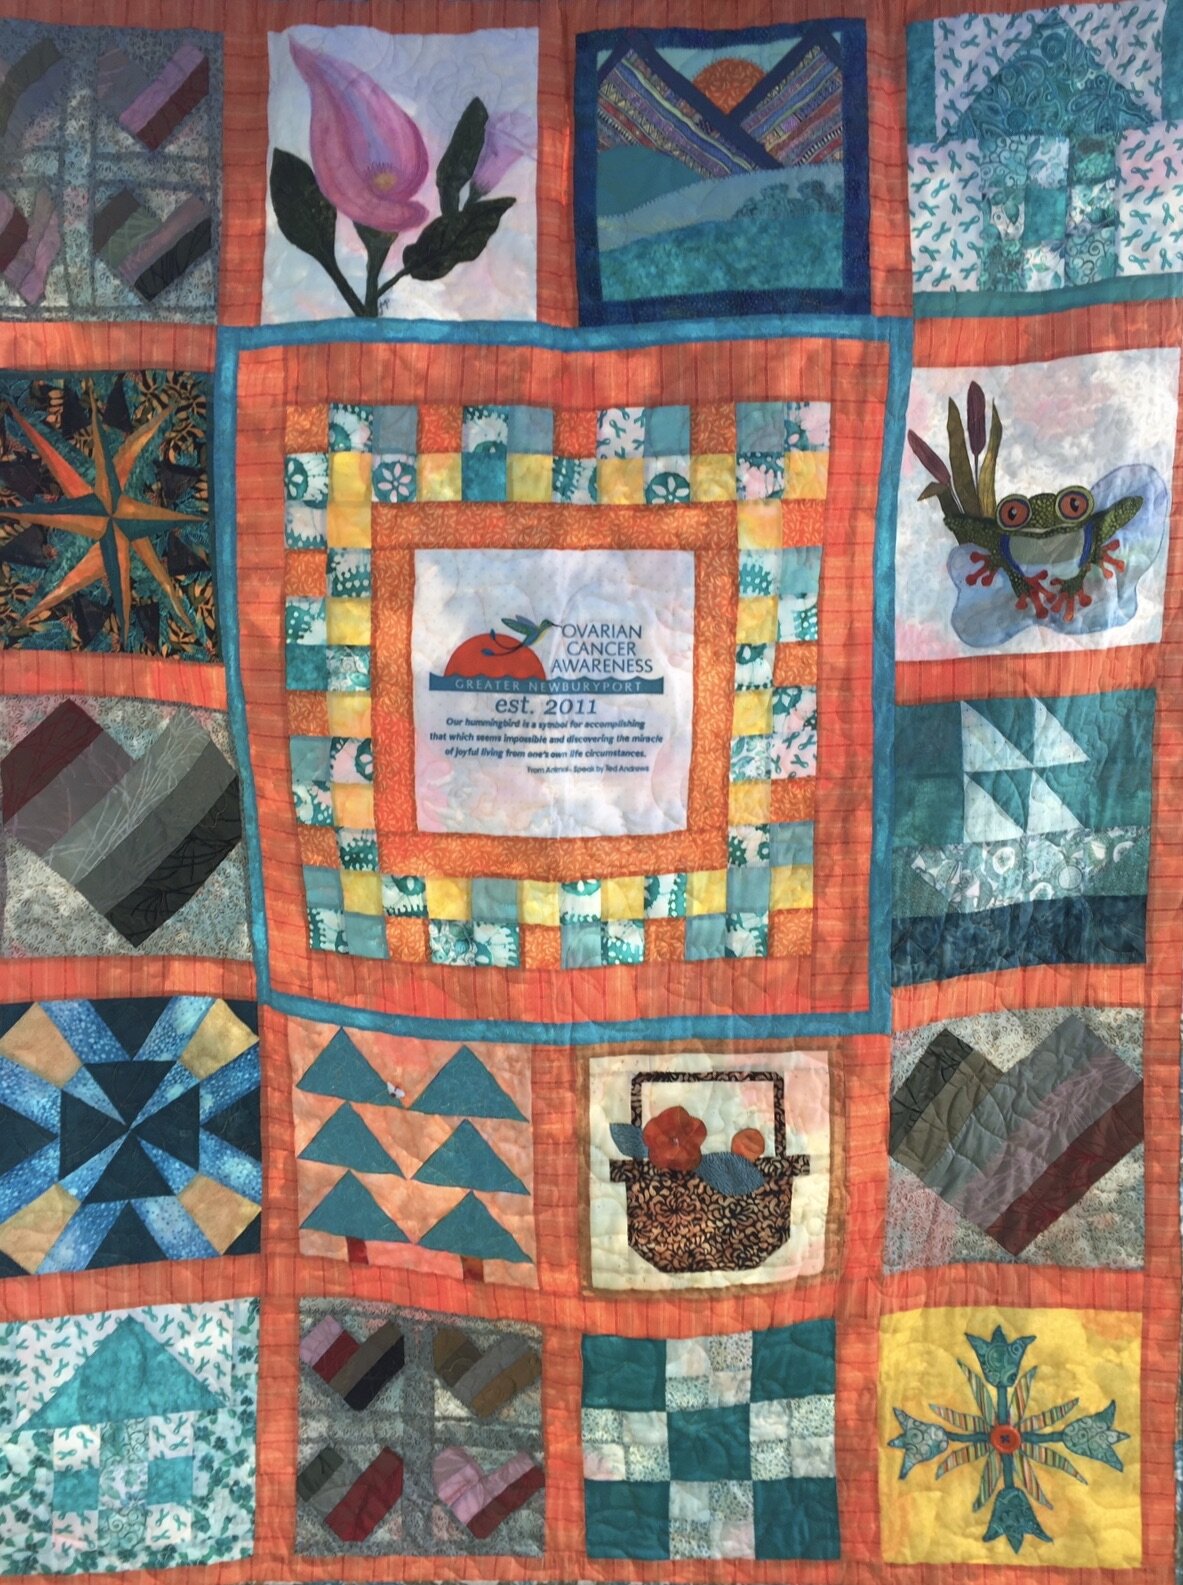 ovarian cancer quilt project